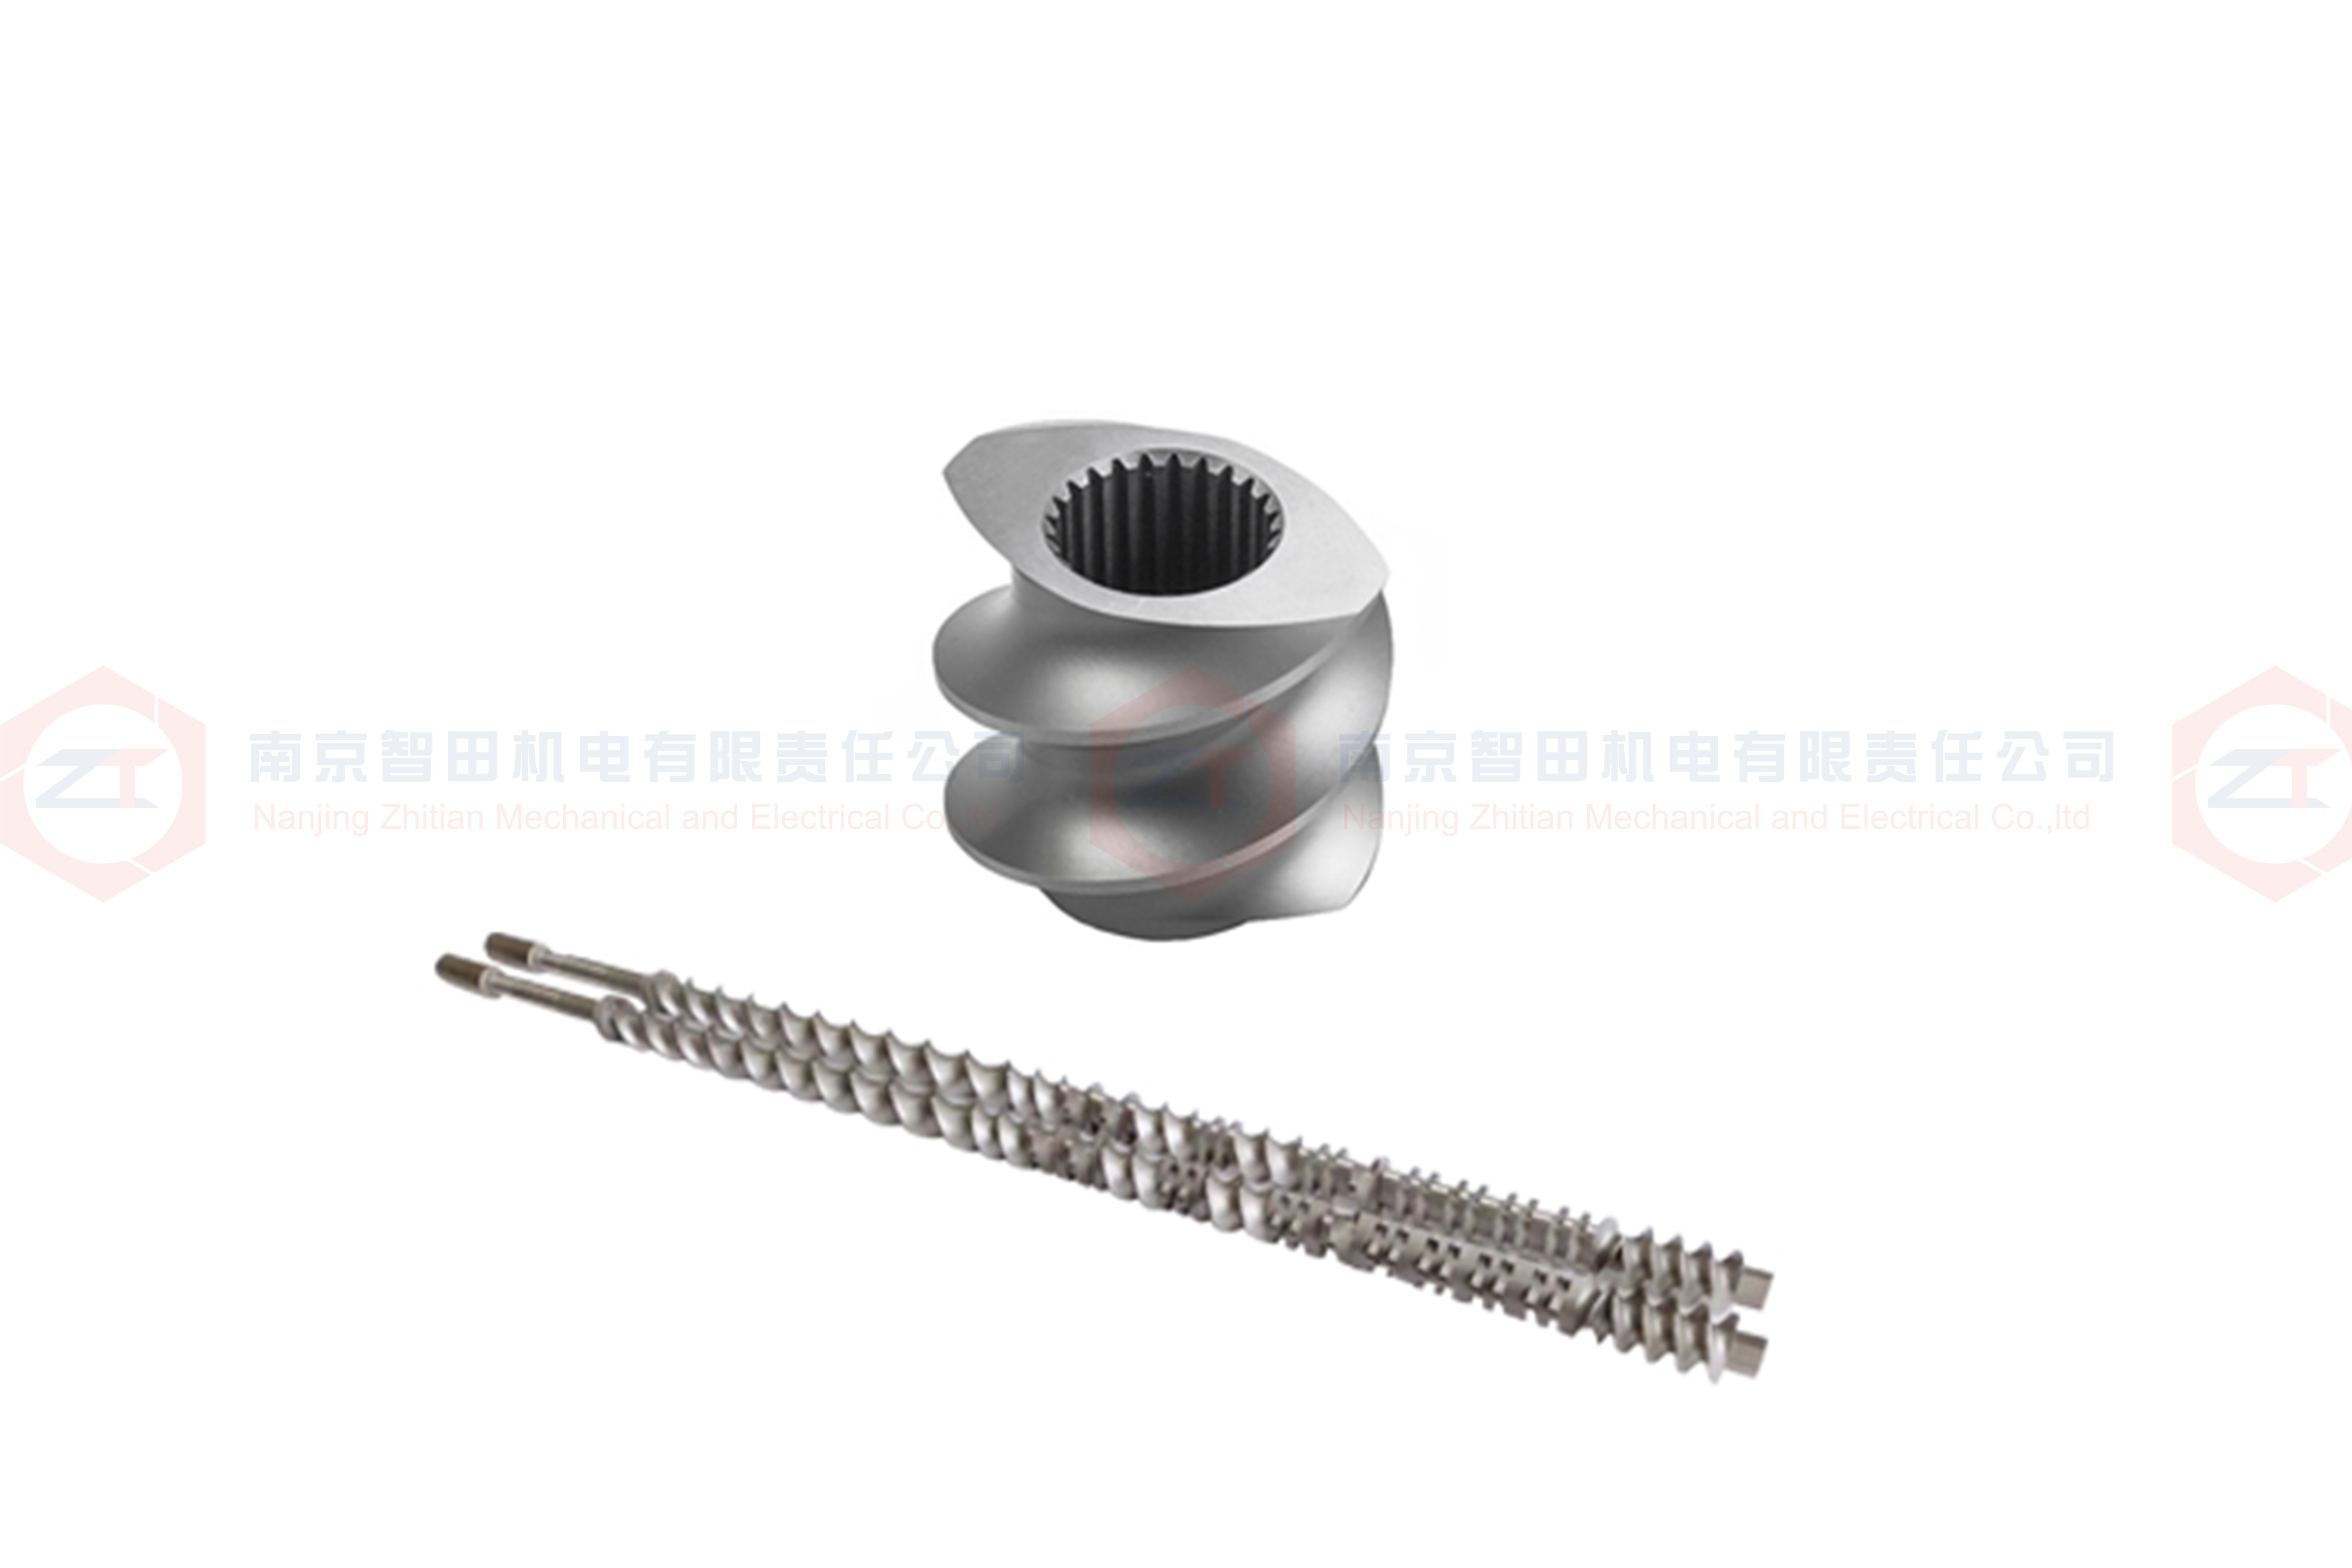 STS Machine 35mm Extruder Screw Element: The Superior Choice for Twin-Screw Extruders